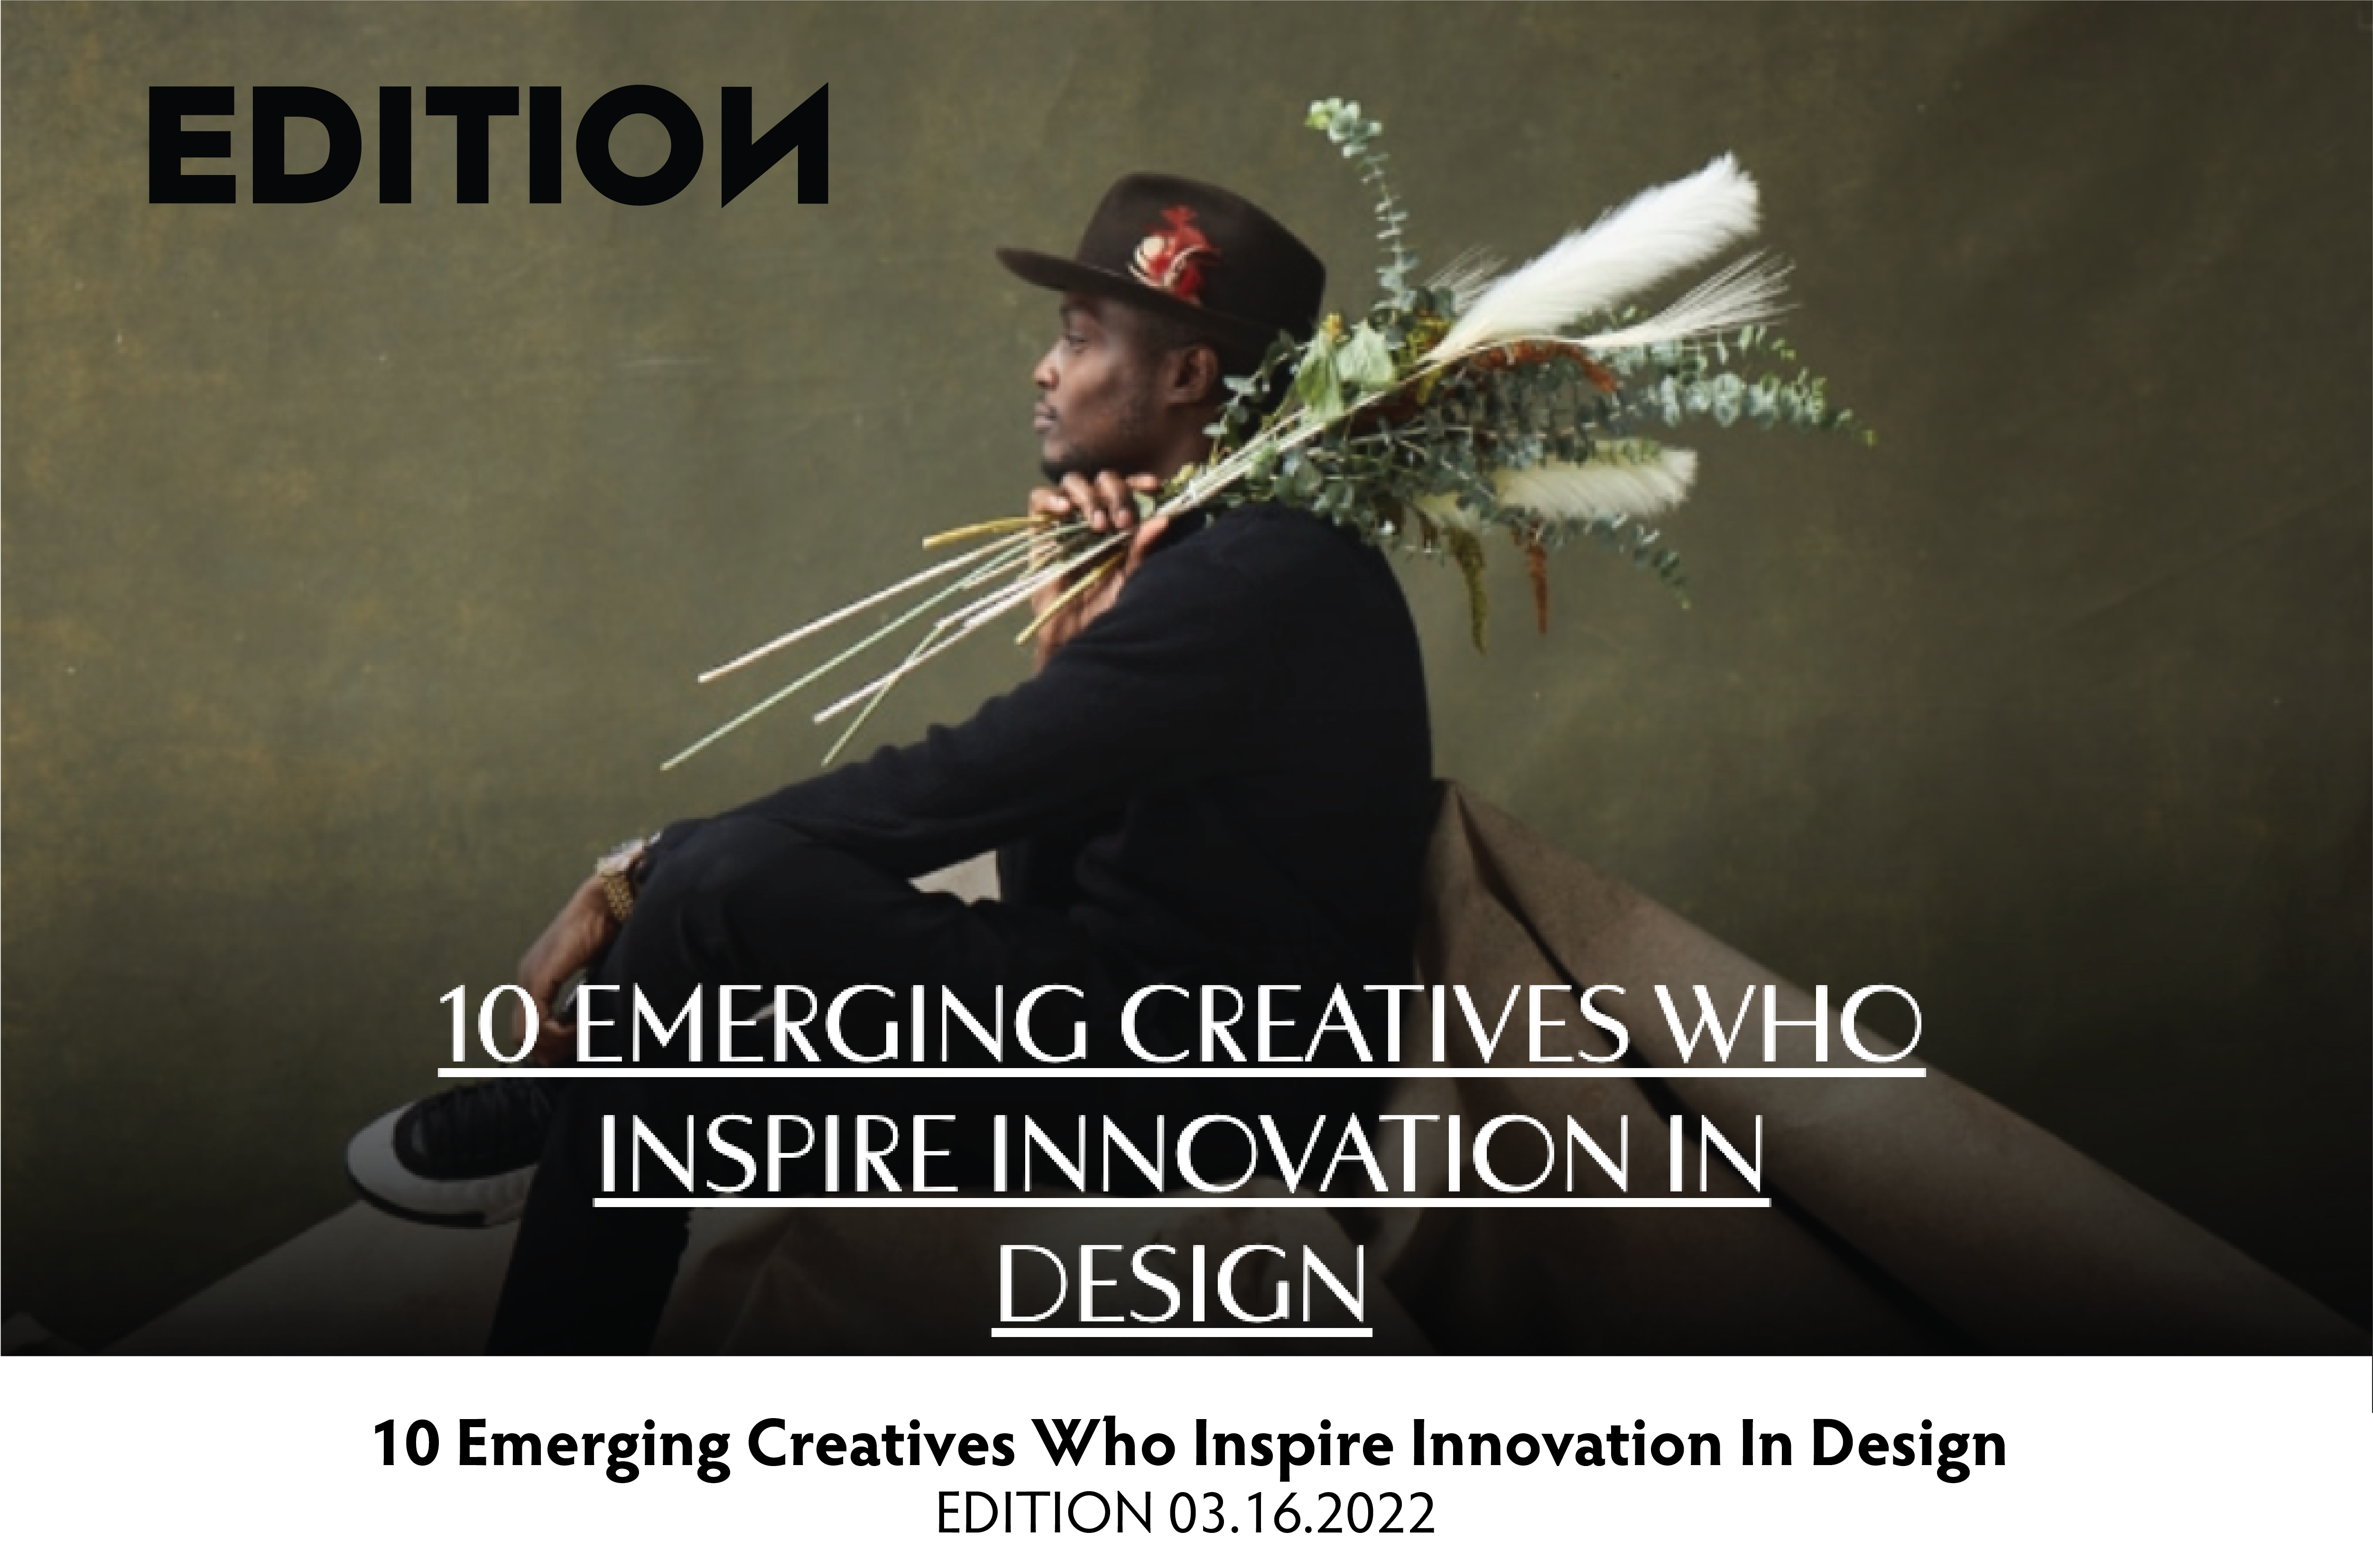 10 Emerging Creatives Who Inspire Innovation In Design